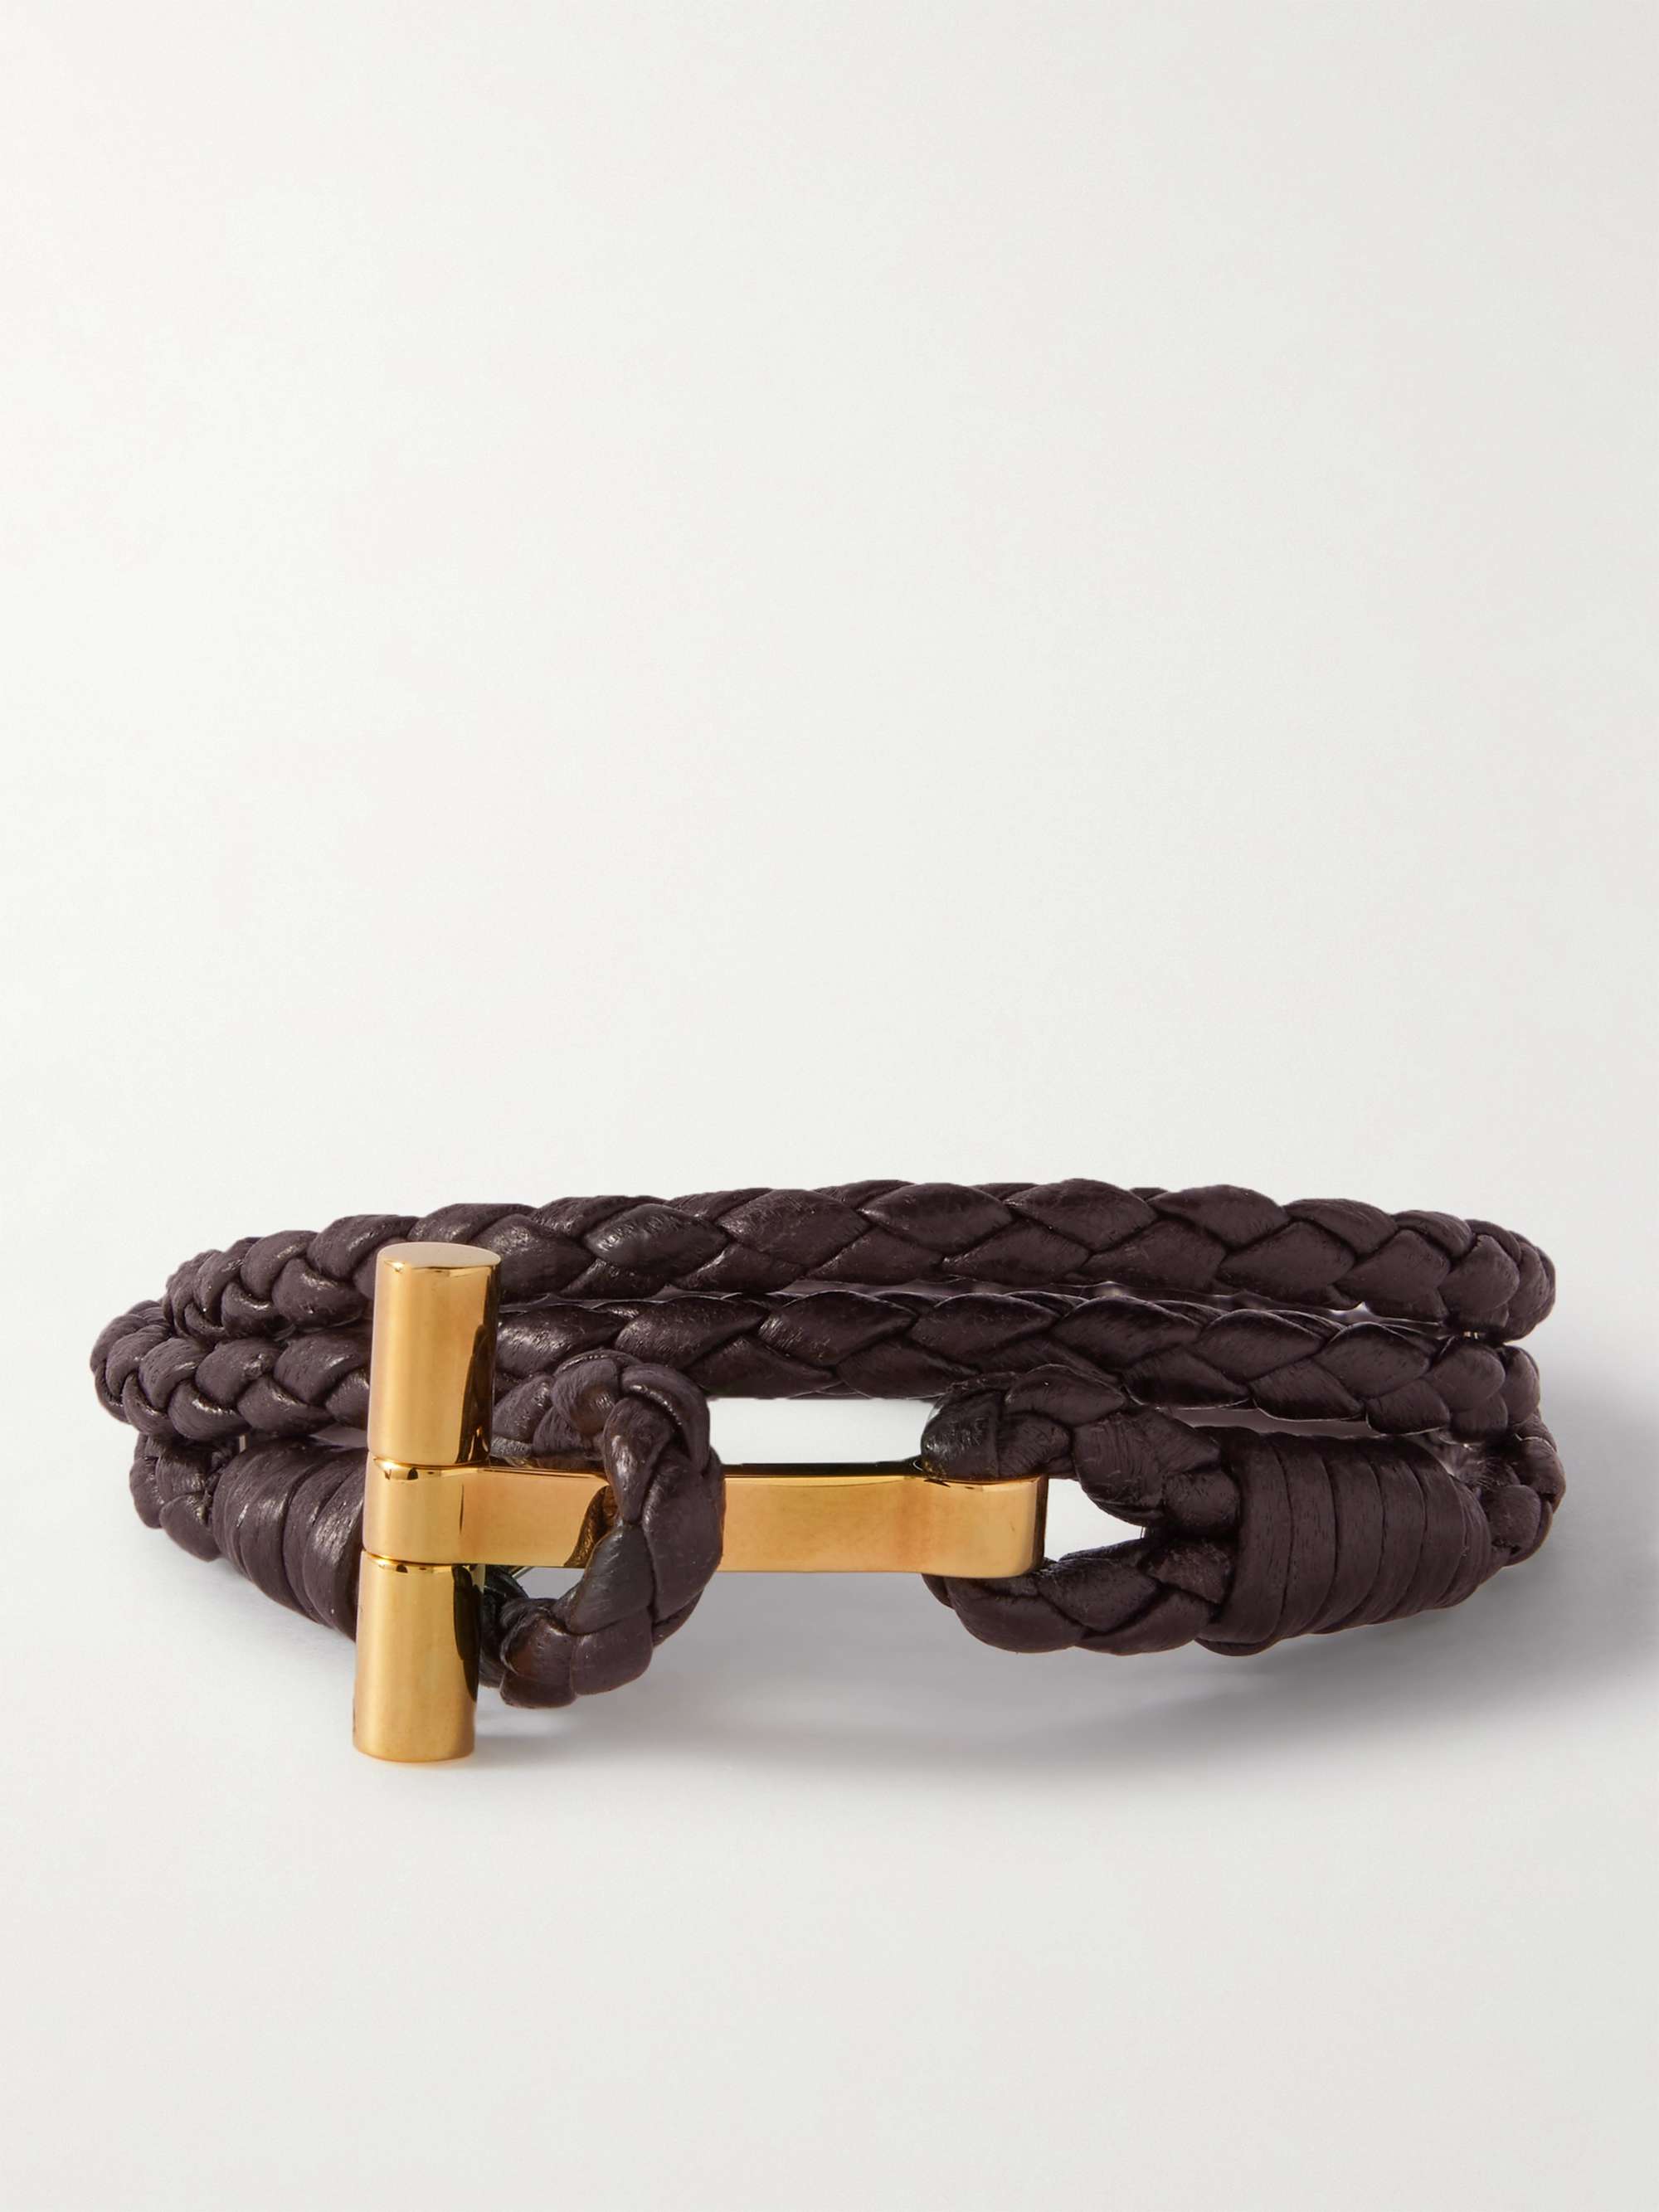 TOM FORD Woven Leather and Gold-Plated Wrap Bracelet | MR PORTER